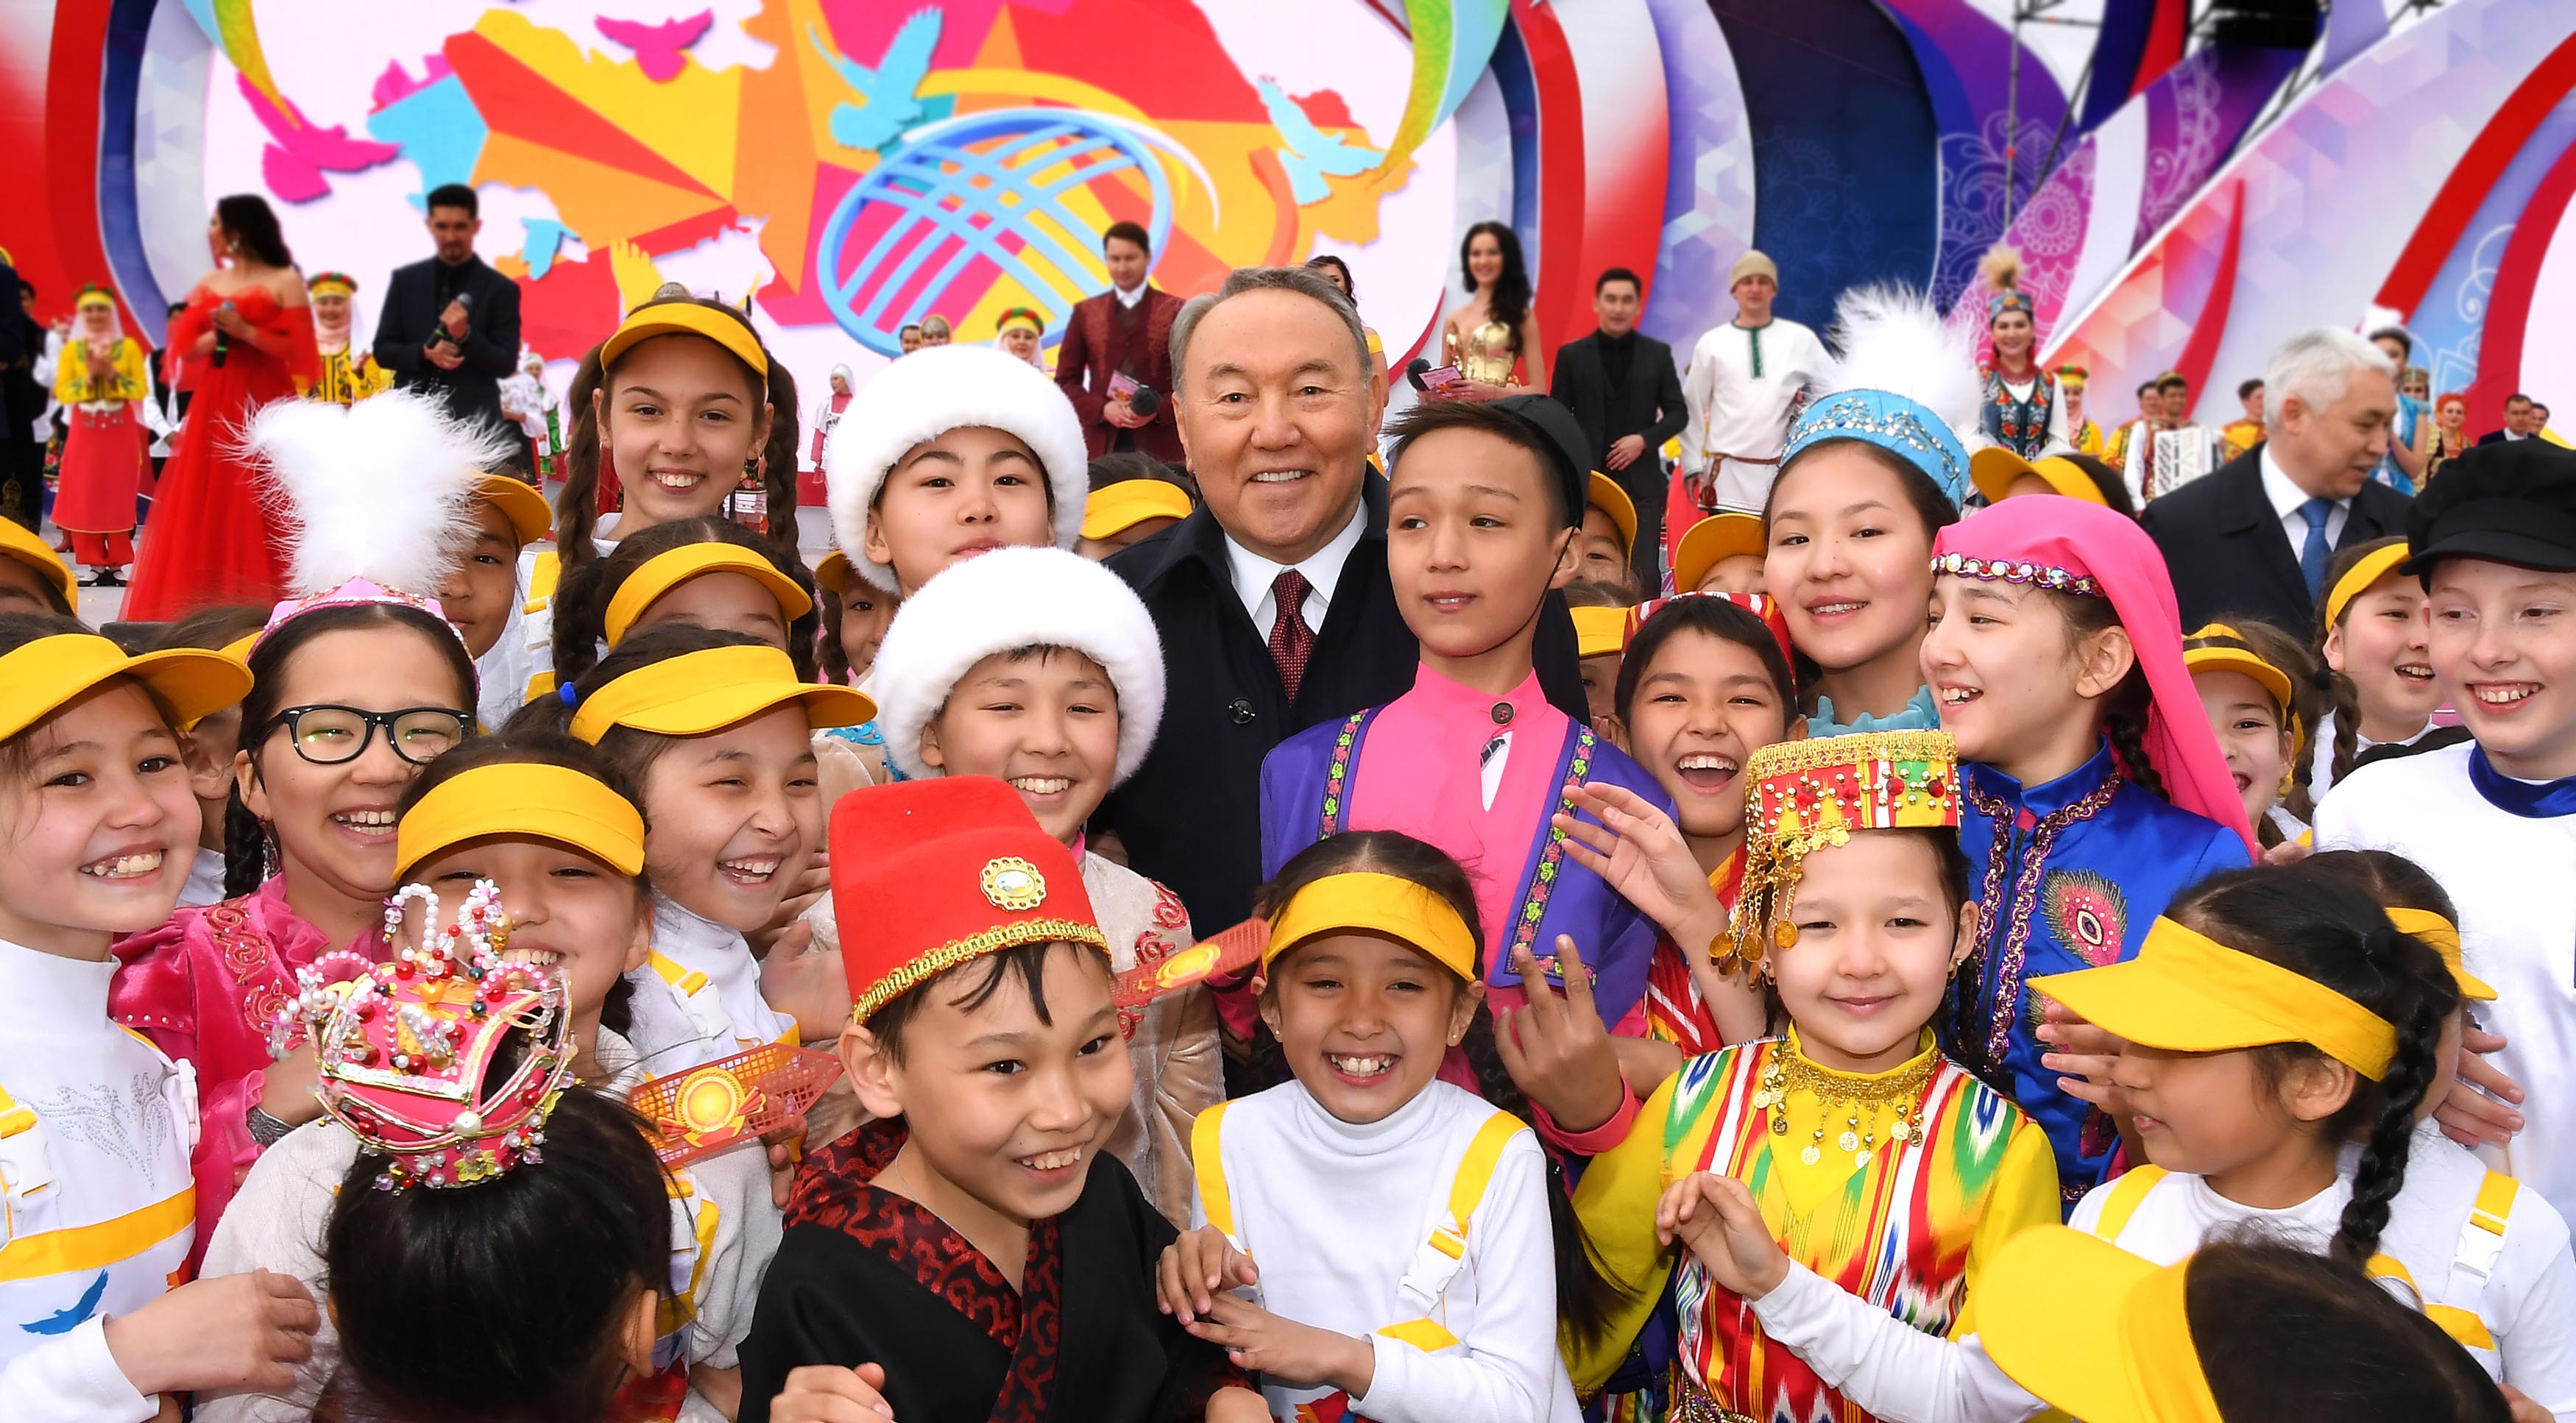 The Head of State participates in celebration of the Day of Unity of the People of Kazakhstan